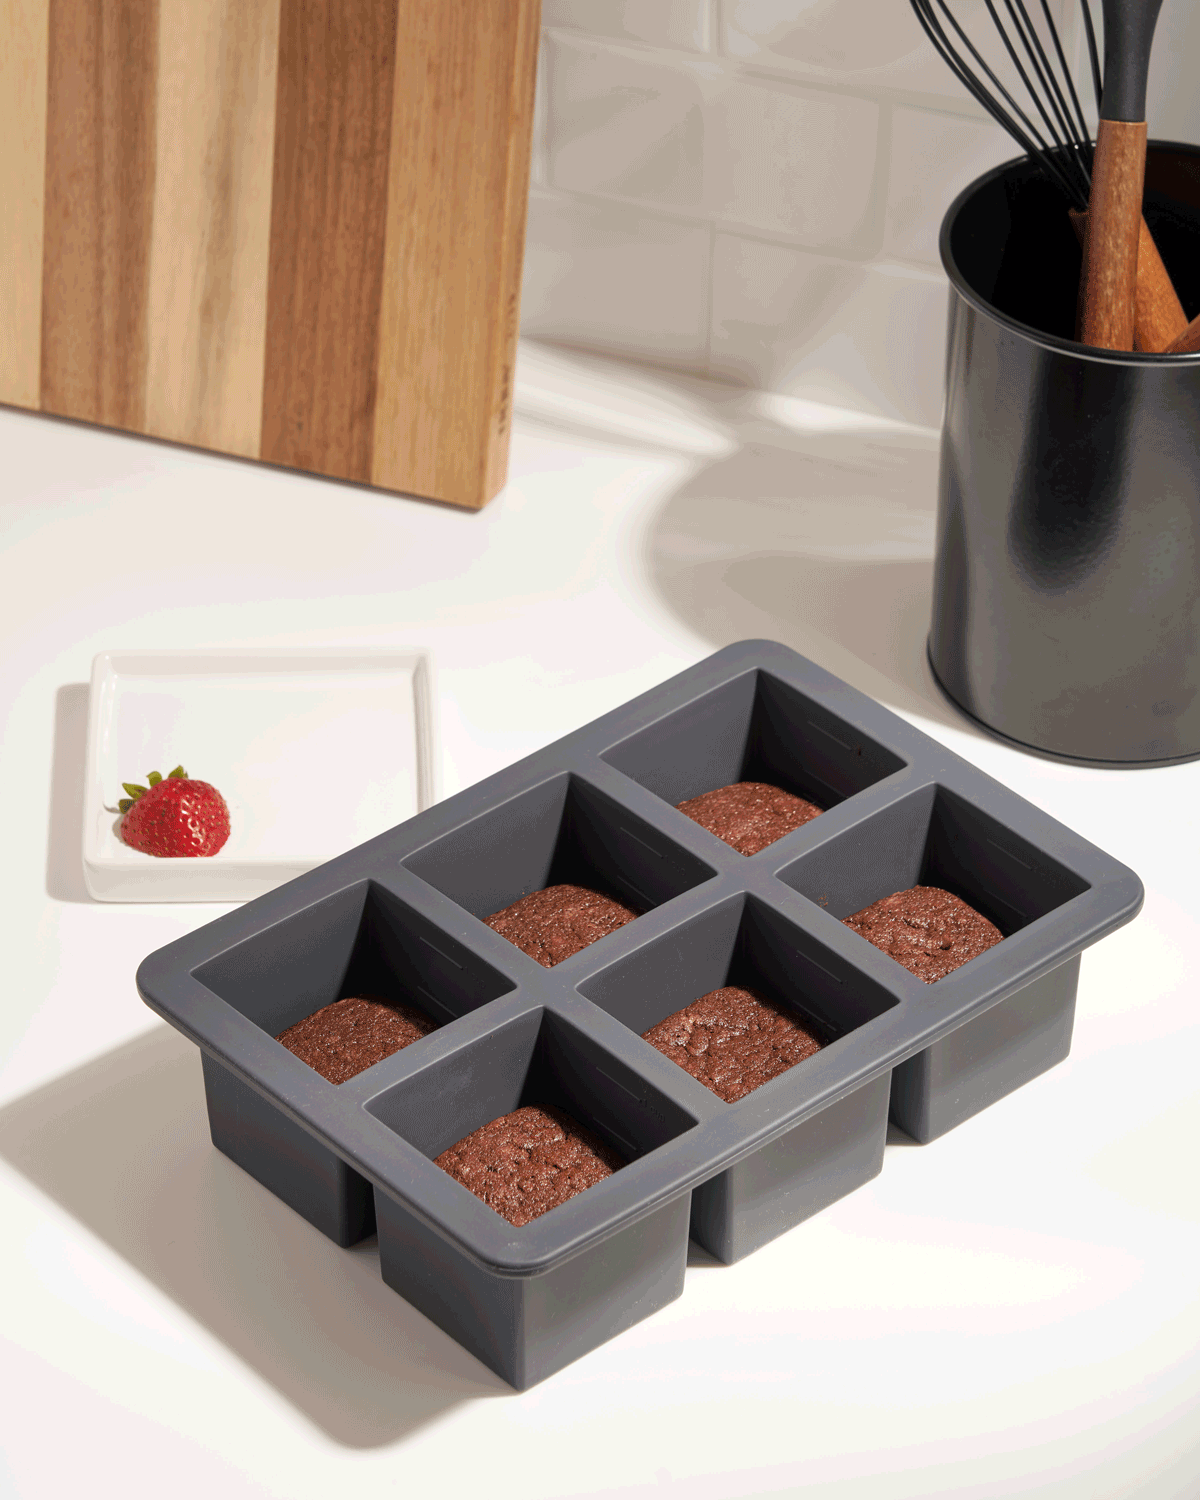  Extra-Large Silicone Freezing Tray with Lid, Walfos 1